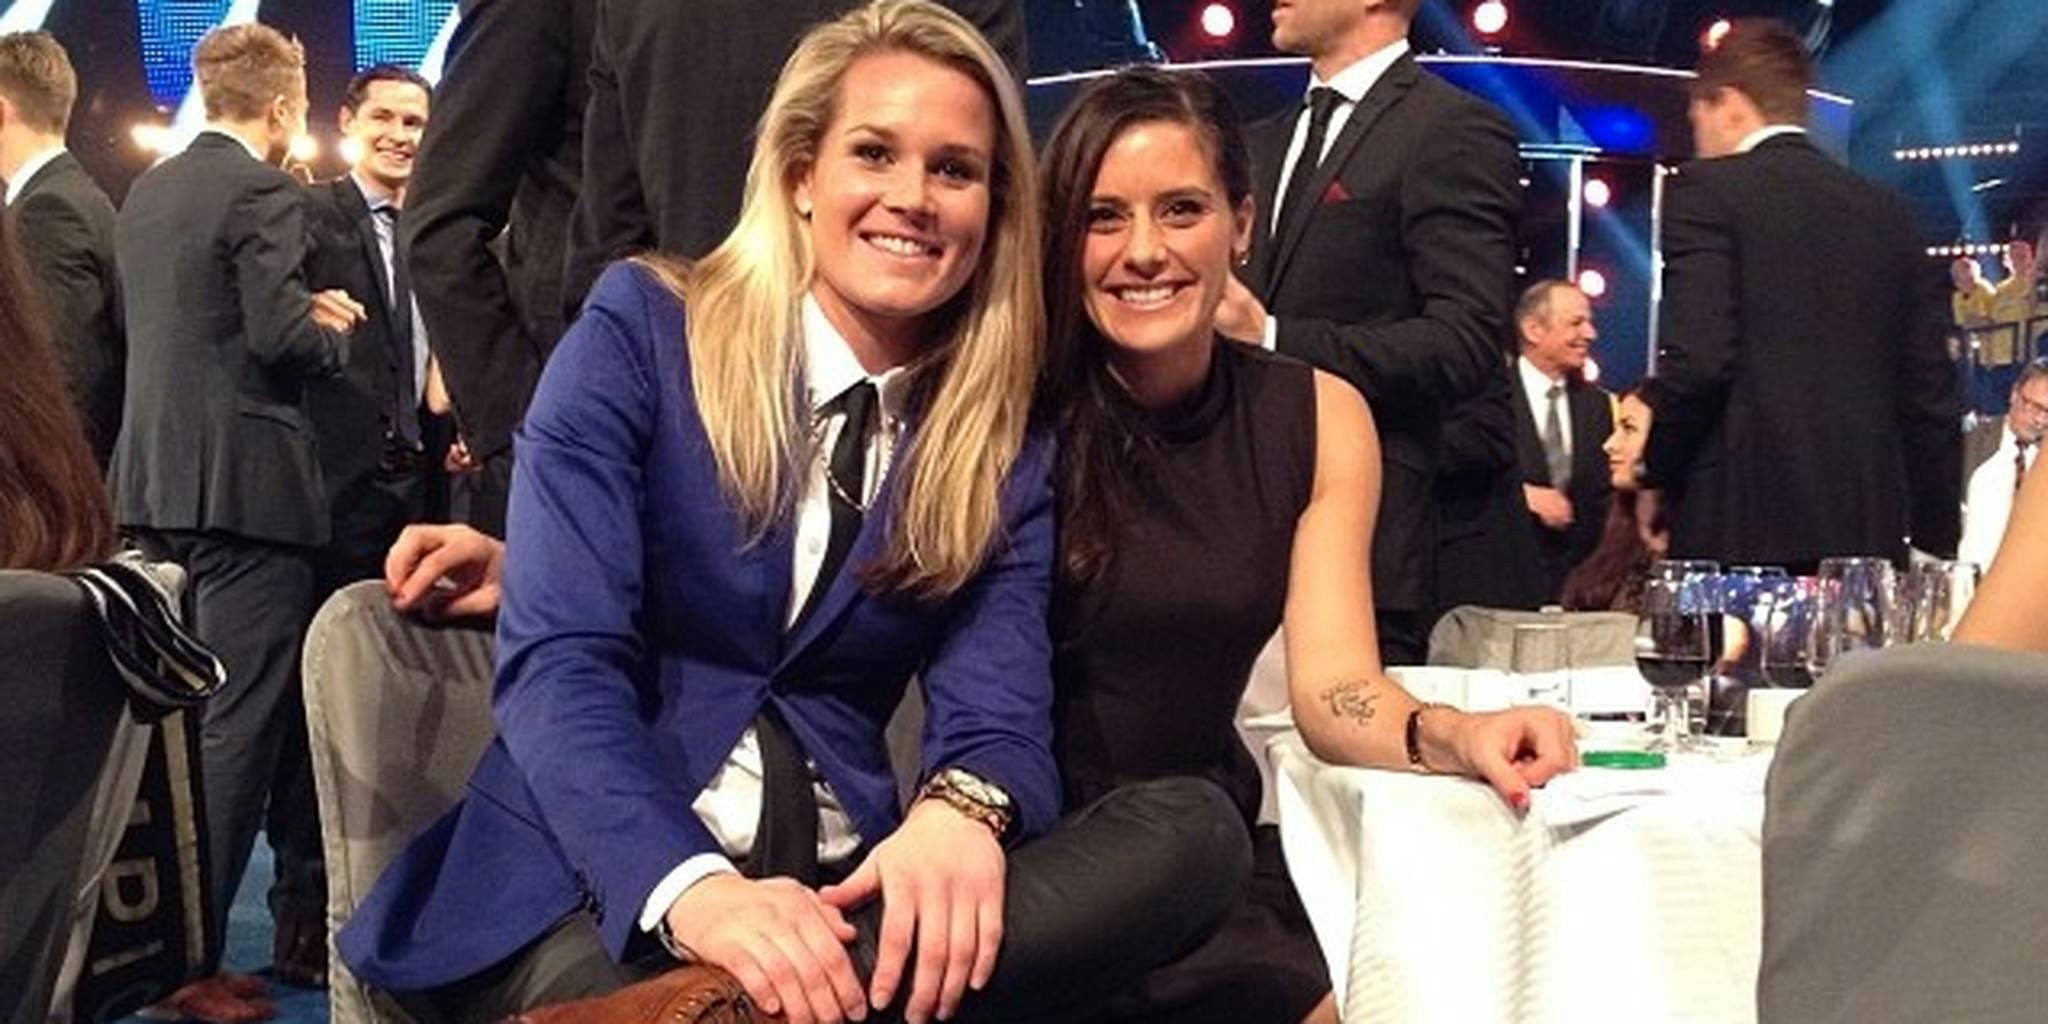 Soccer fans are obsessed with the relationship between Ali Krieger and Ashl...